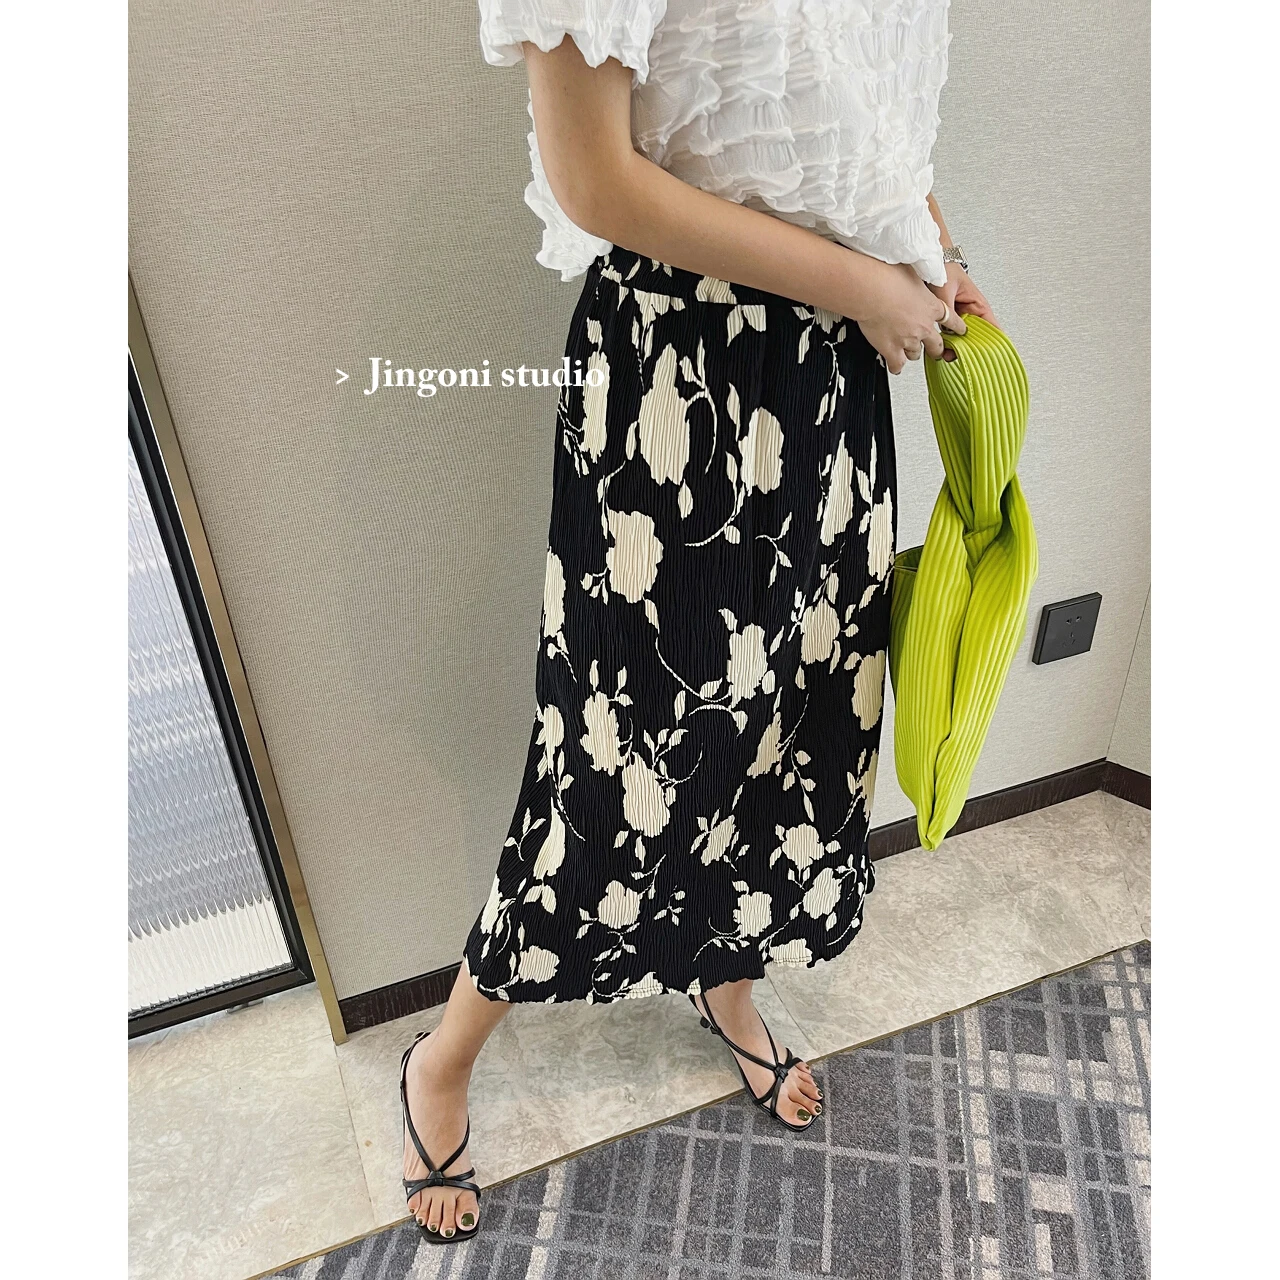 Floral Pleated Skirt Long Y2k Fashion Woman Summer 2023 Clothing Korean Party Vintage Beach Style Ruffle Cargo Black